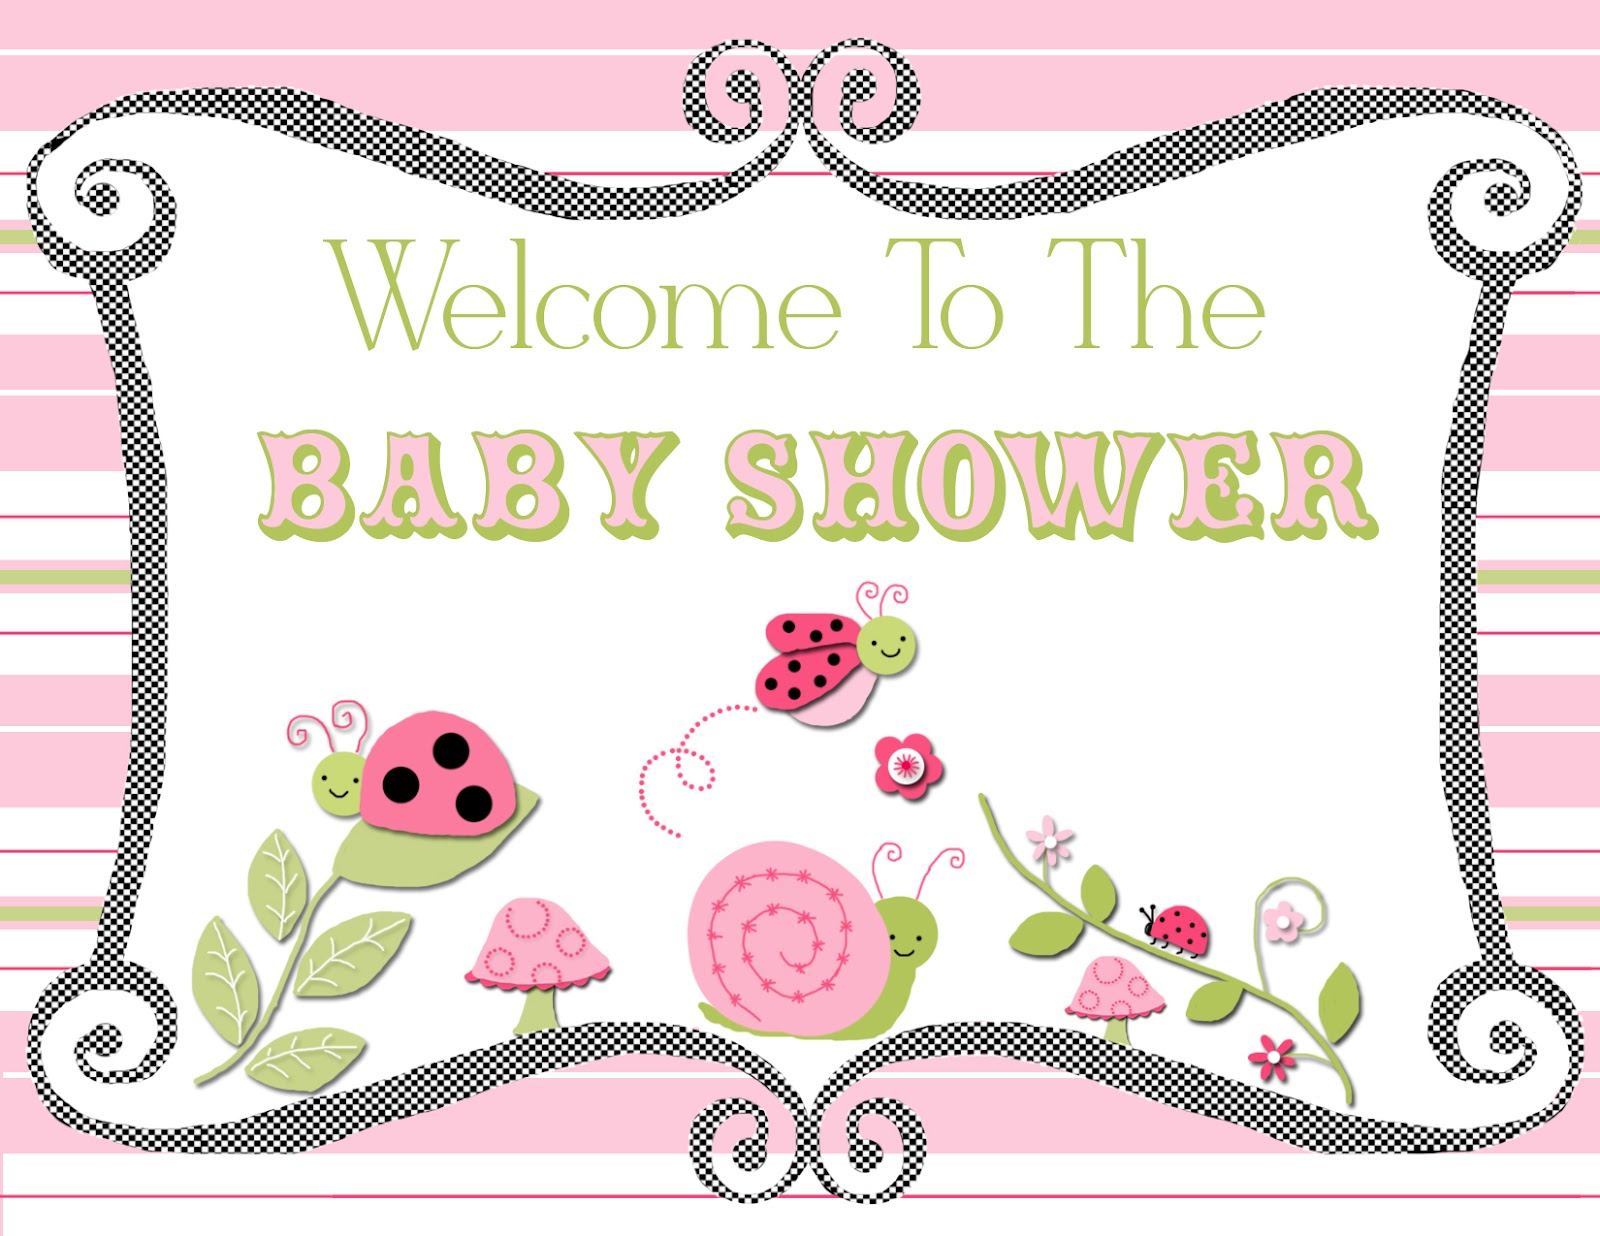 Full Size of Baby Shower:89+ Indulging Baby Shower Banner Picture Inspirations Baby Shower Banner Baby Shower Venues London Baby Shower Drinks Baby Shower Food Martha Stewart Baby Shower Shower Baby My Baby Shower Baby Shower Signs Decoration Baby Shower Signs Printable Baby Shower